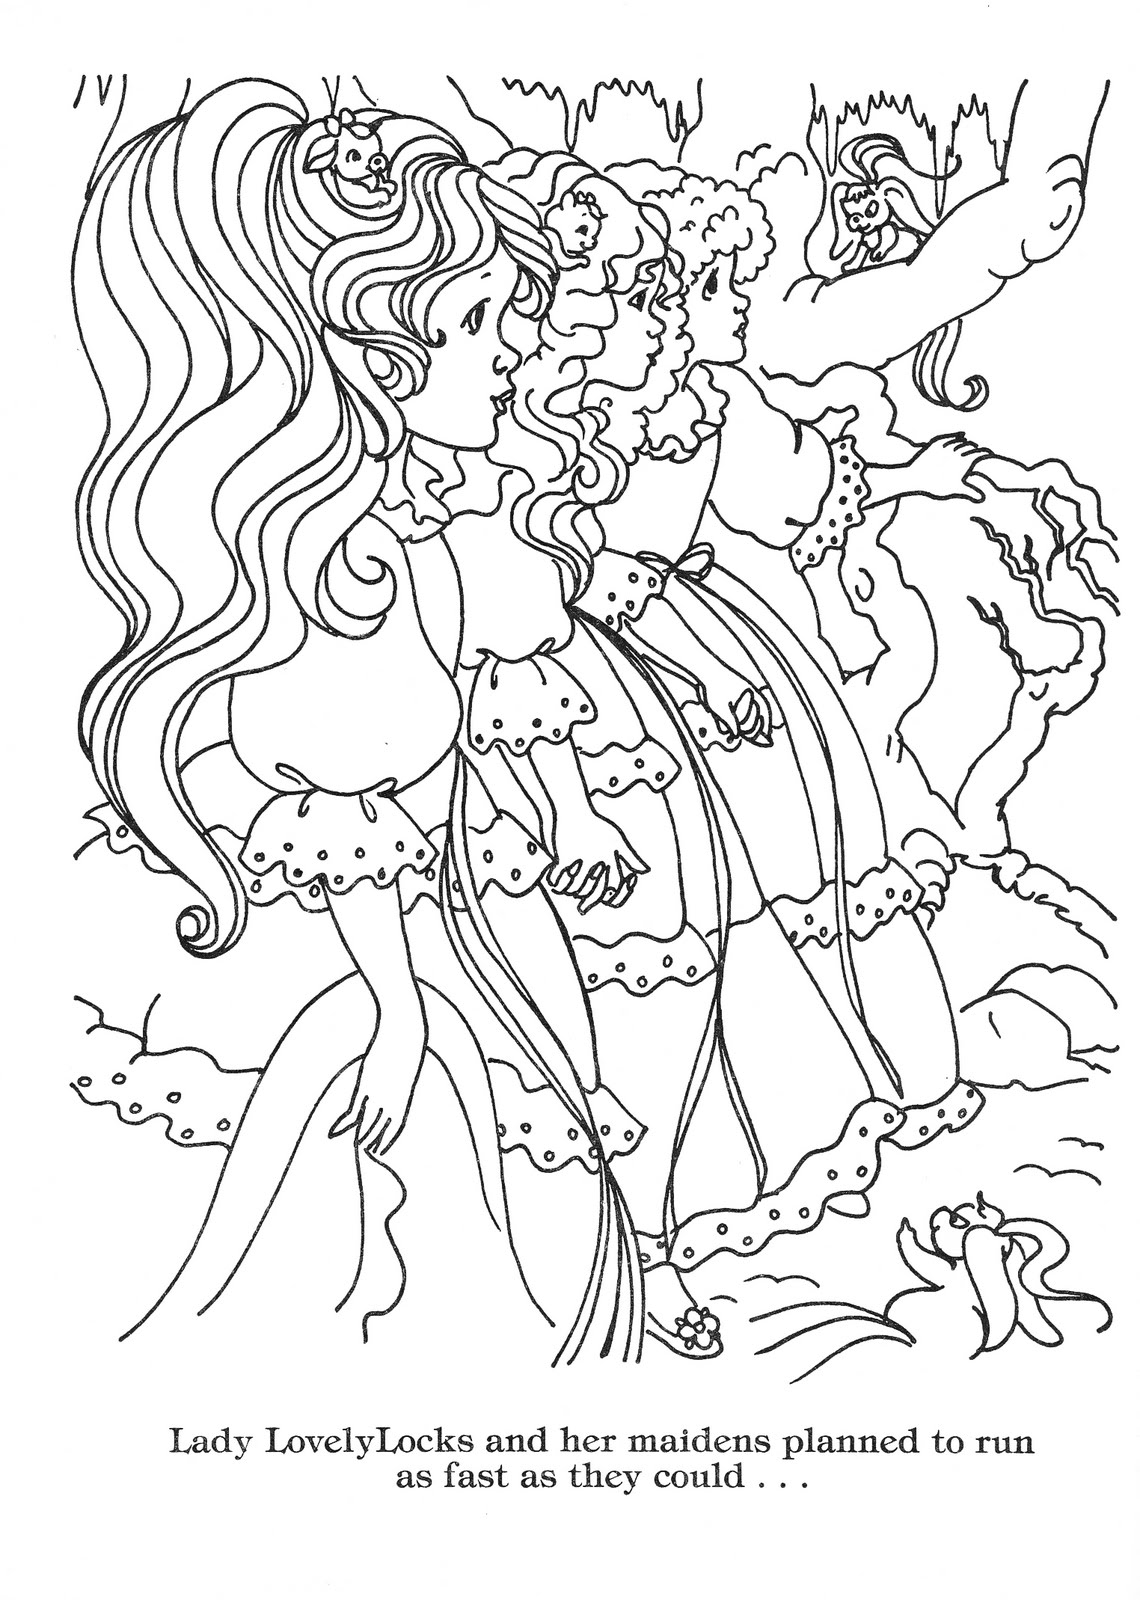 Lady Lovely Locks Coloring Book: Lady Lovely Locks - The Begining ...